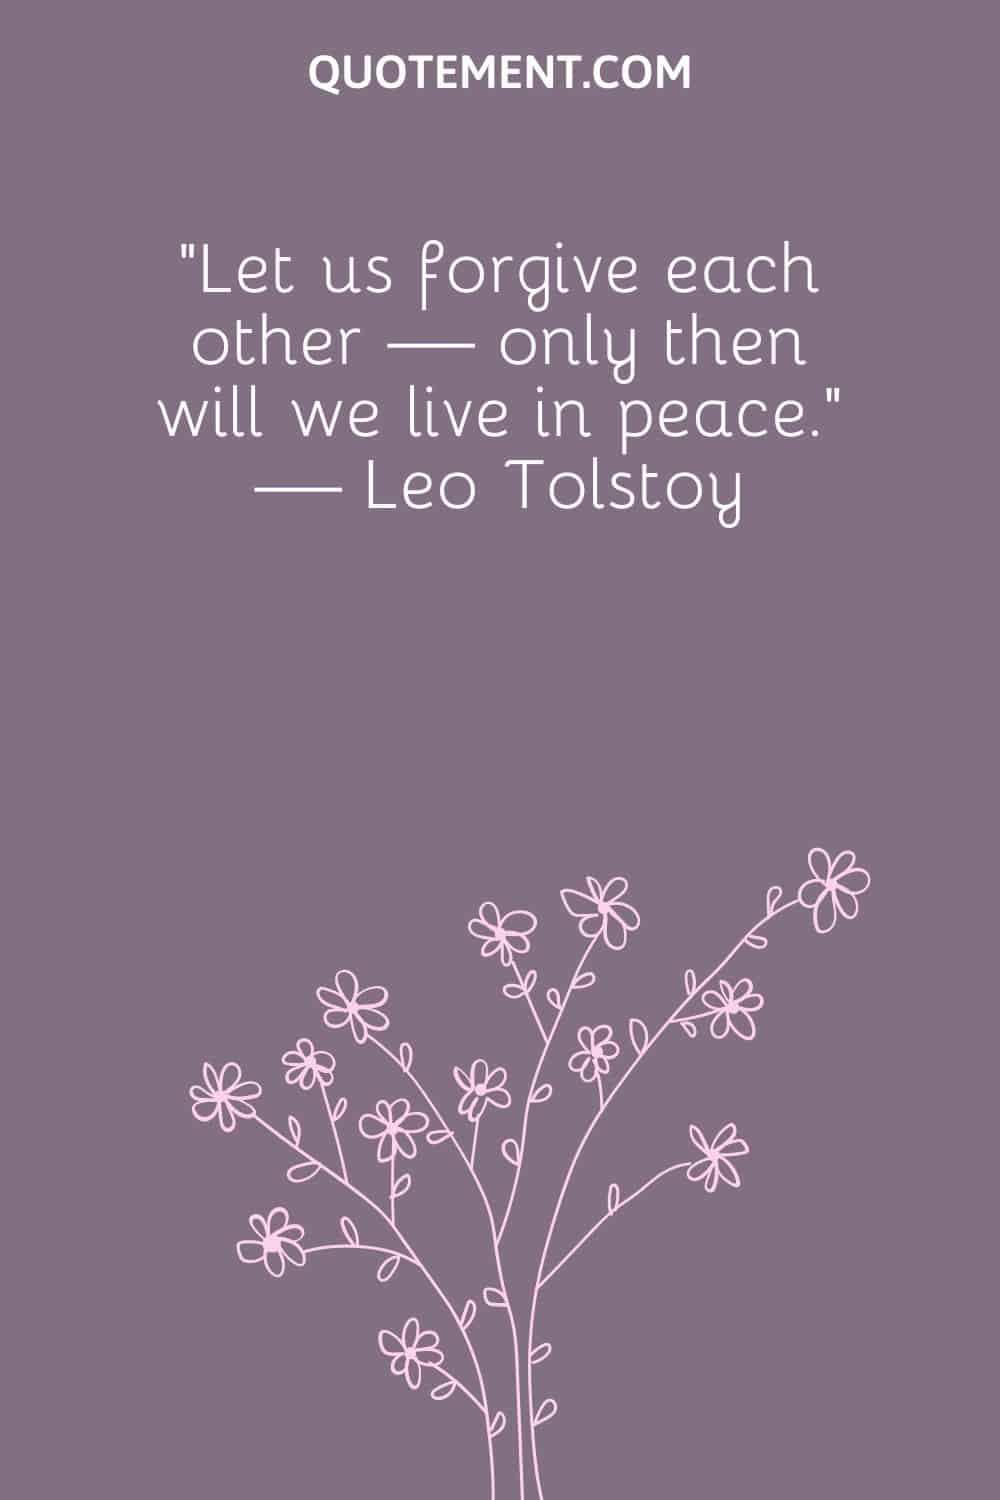 “Let us forgive each other — only then will we live in peace.” — Leo Tolstoy